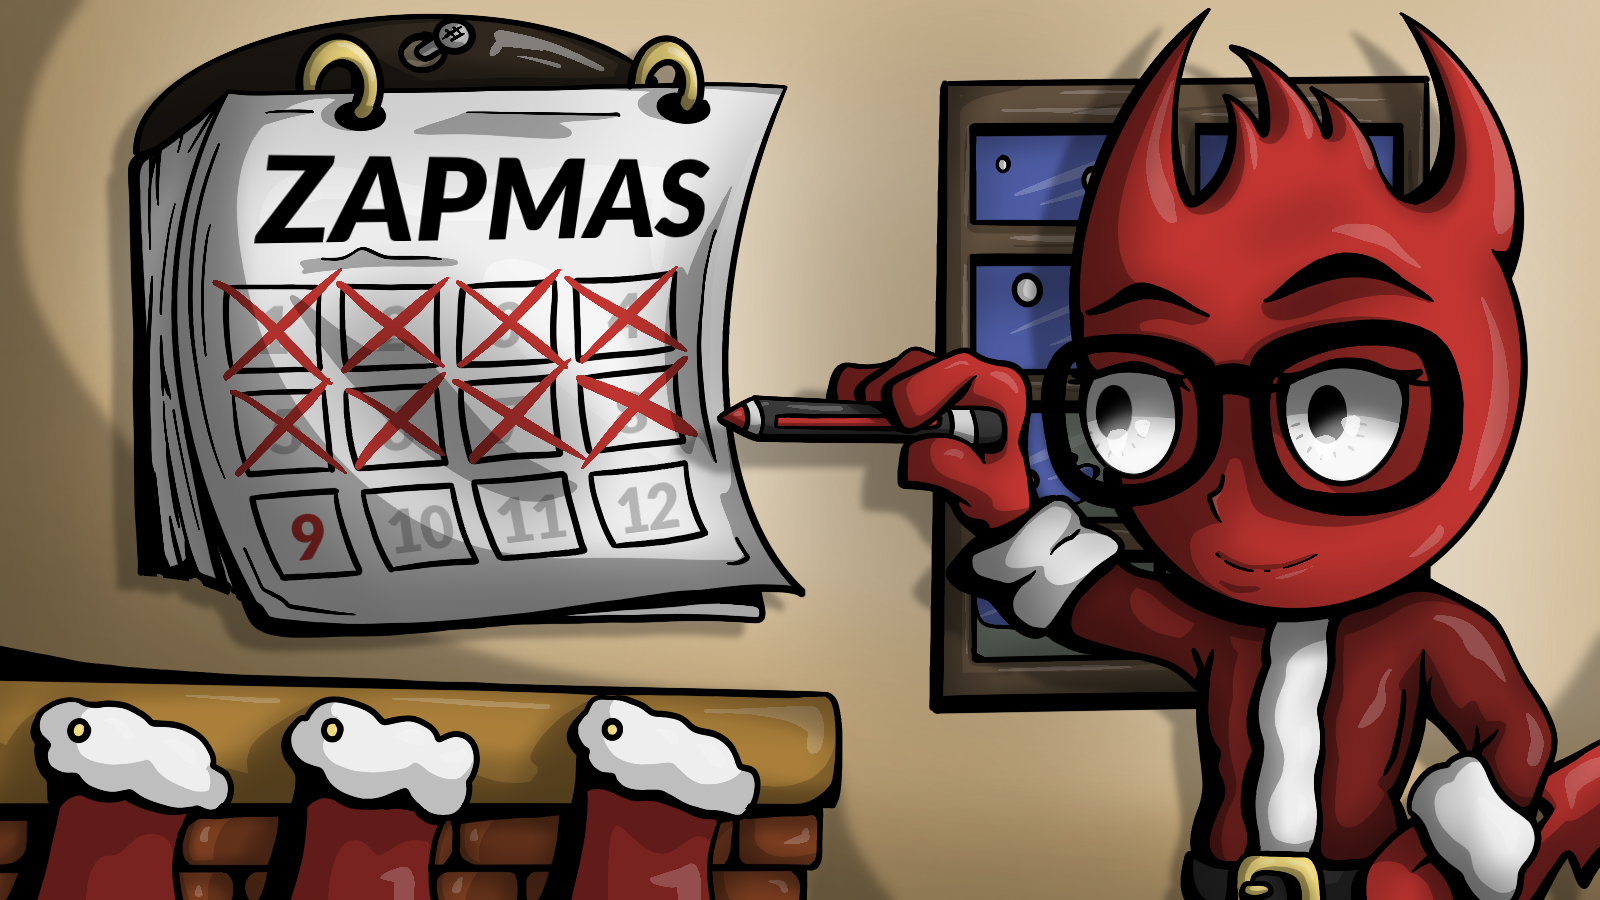 Twelve Days of ZAPmas - Day 9 - Automated Scanning and ATTACK mode